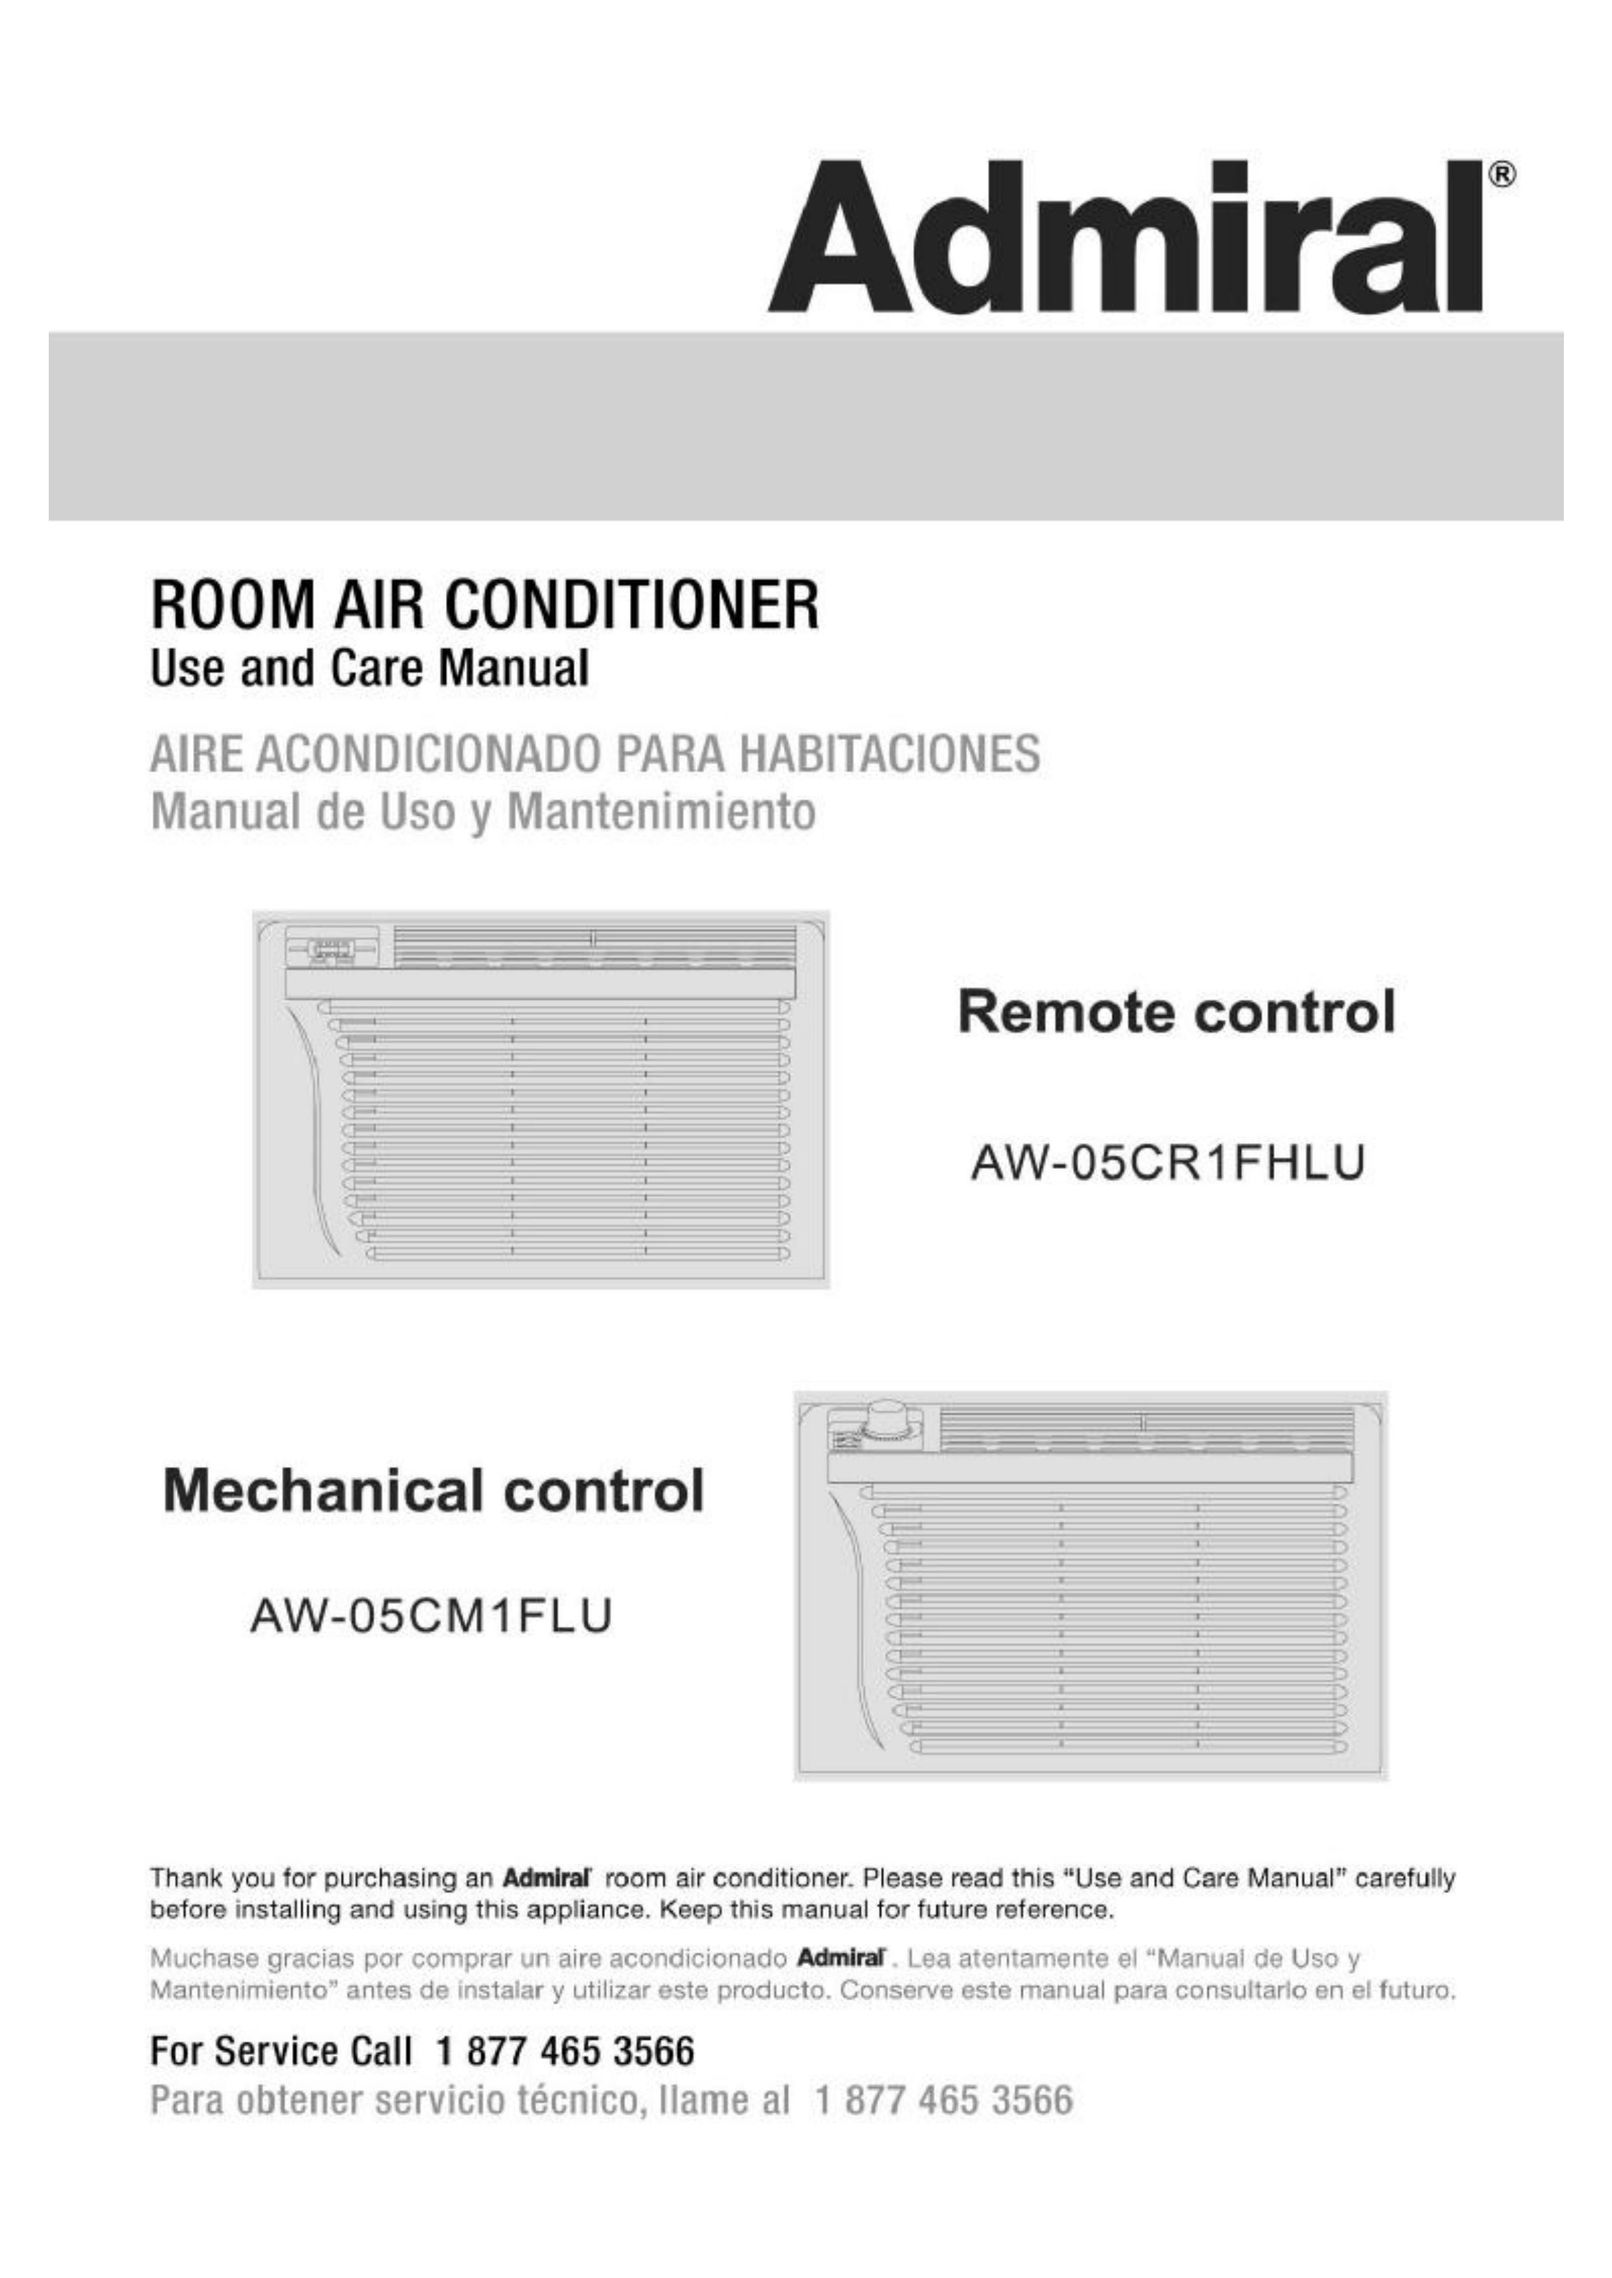 Admiral AW-05CR1FHLU Air Conditioner User Manual (Page 1)